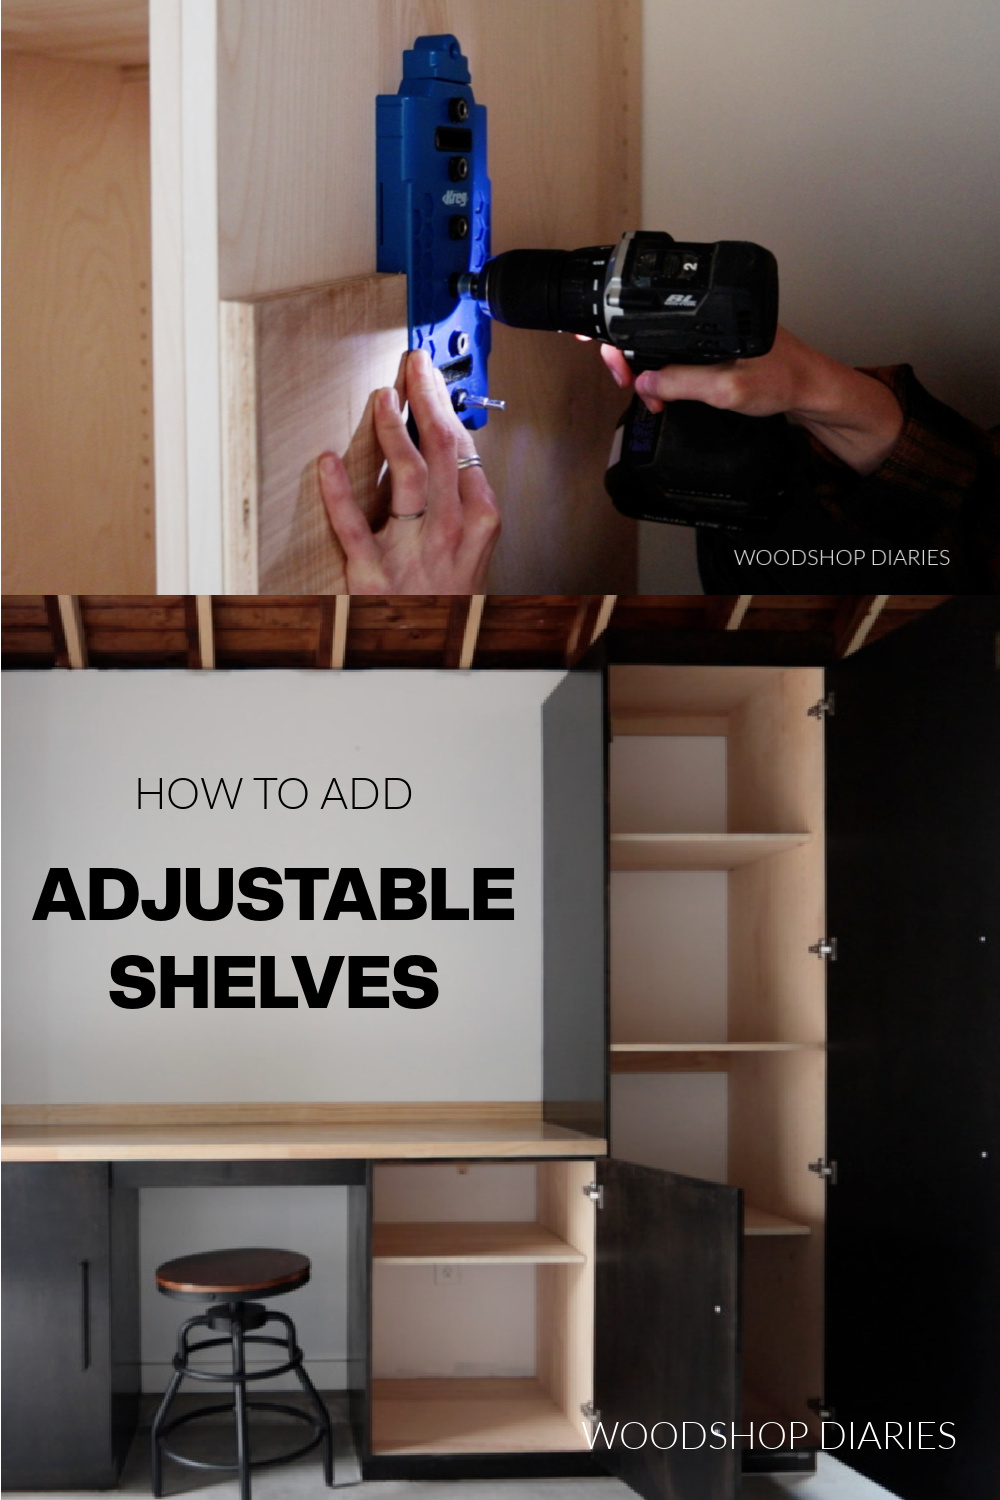 Cabinets with door open at bottom and shelf pin jig at top with text "how to add adjustable shelves" pin image